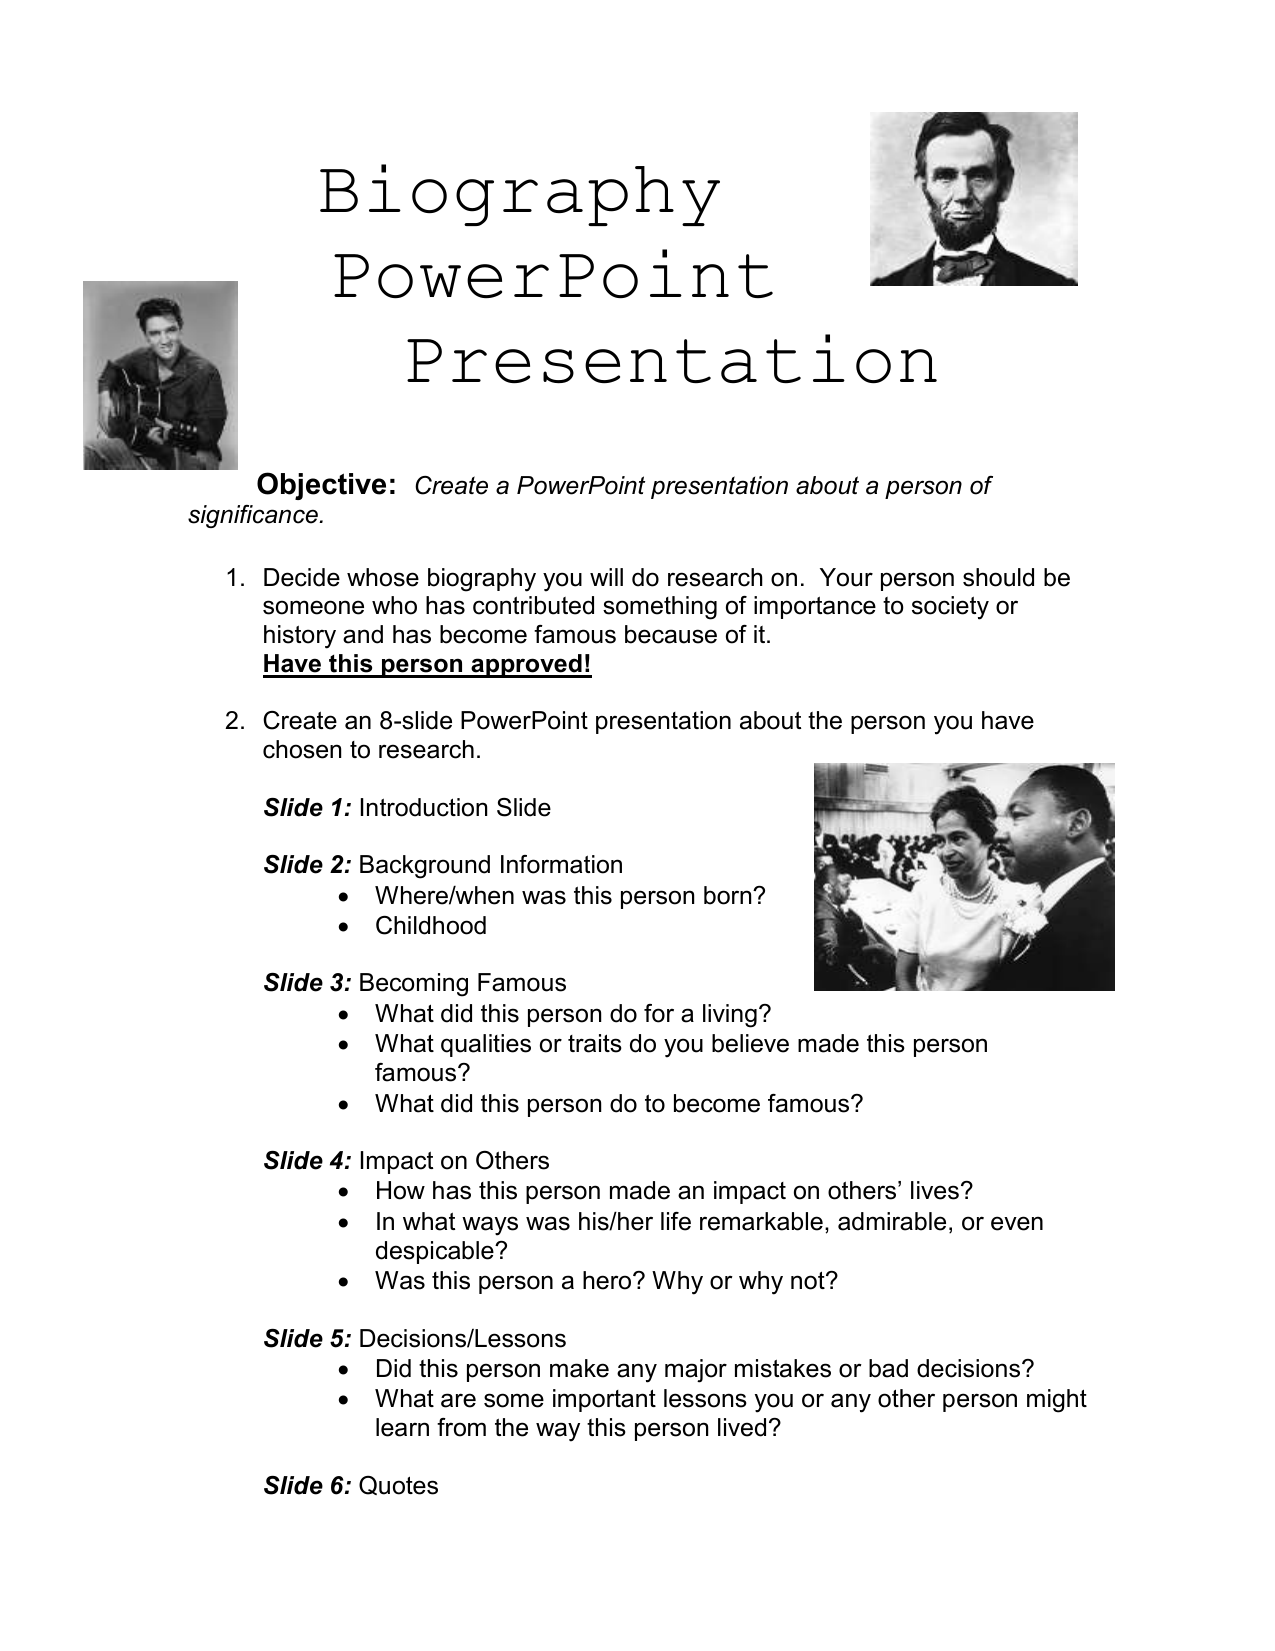 powerpoint presentation about a person